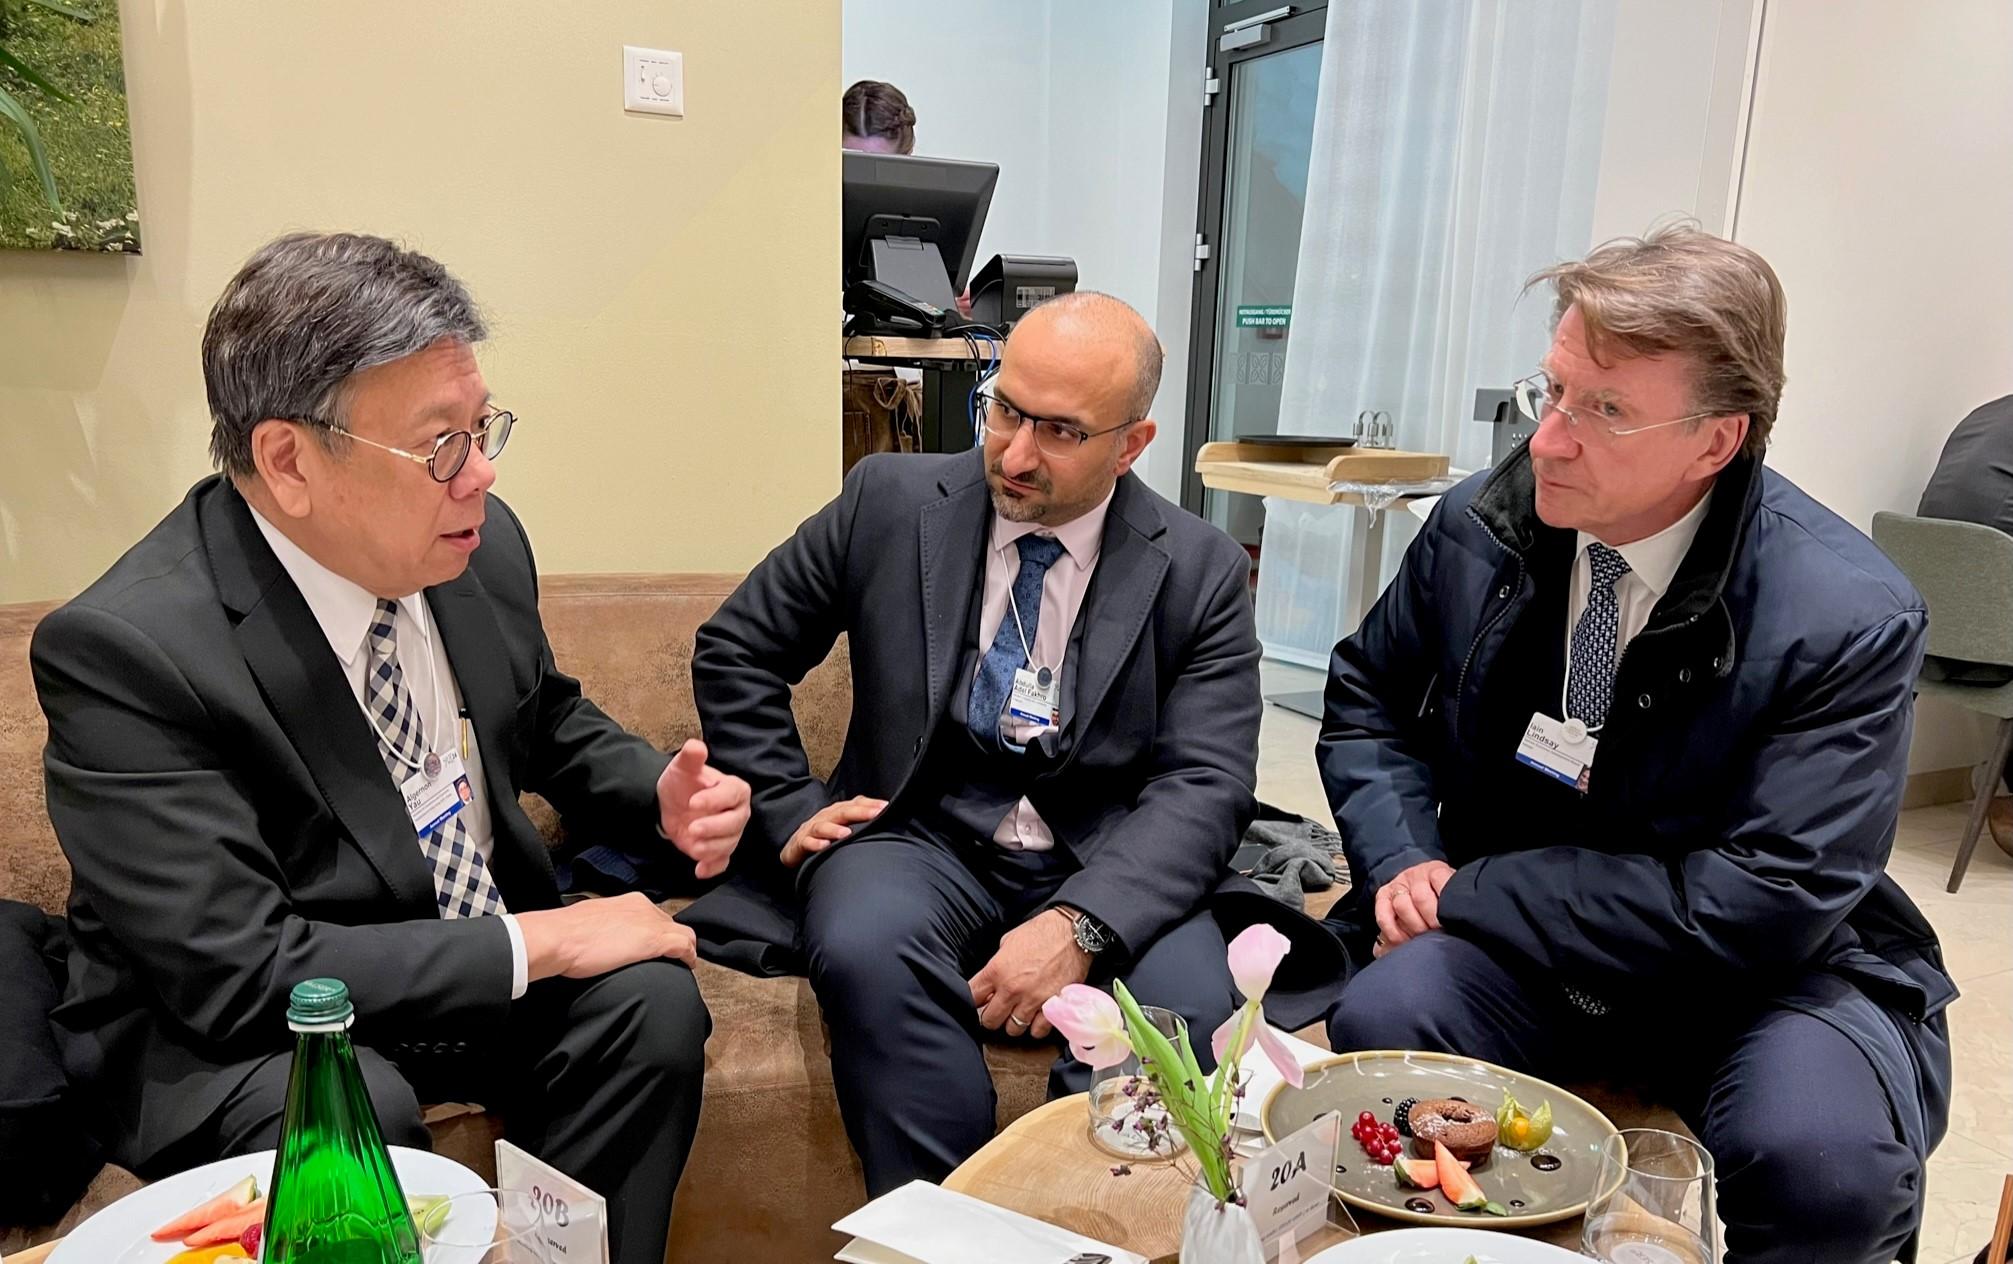 The Secretary for Commerce and Economic Development, Mr Algernon Yau (left), meets with the Minister of Industry and Commerce of Bahrain, Mr Abdulla Adel Fakhro (centre), on January 18 (Davos time) during the World Economic Forum Annual Meeting at Davos, Switzerland. Advisor to the Bahrain Economic Development Board, Mr Iain Lindsay (right), also attended.